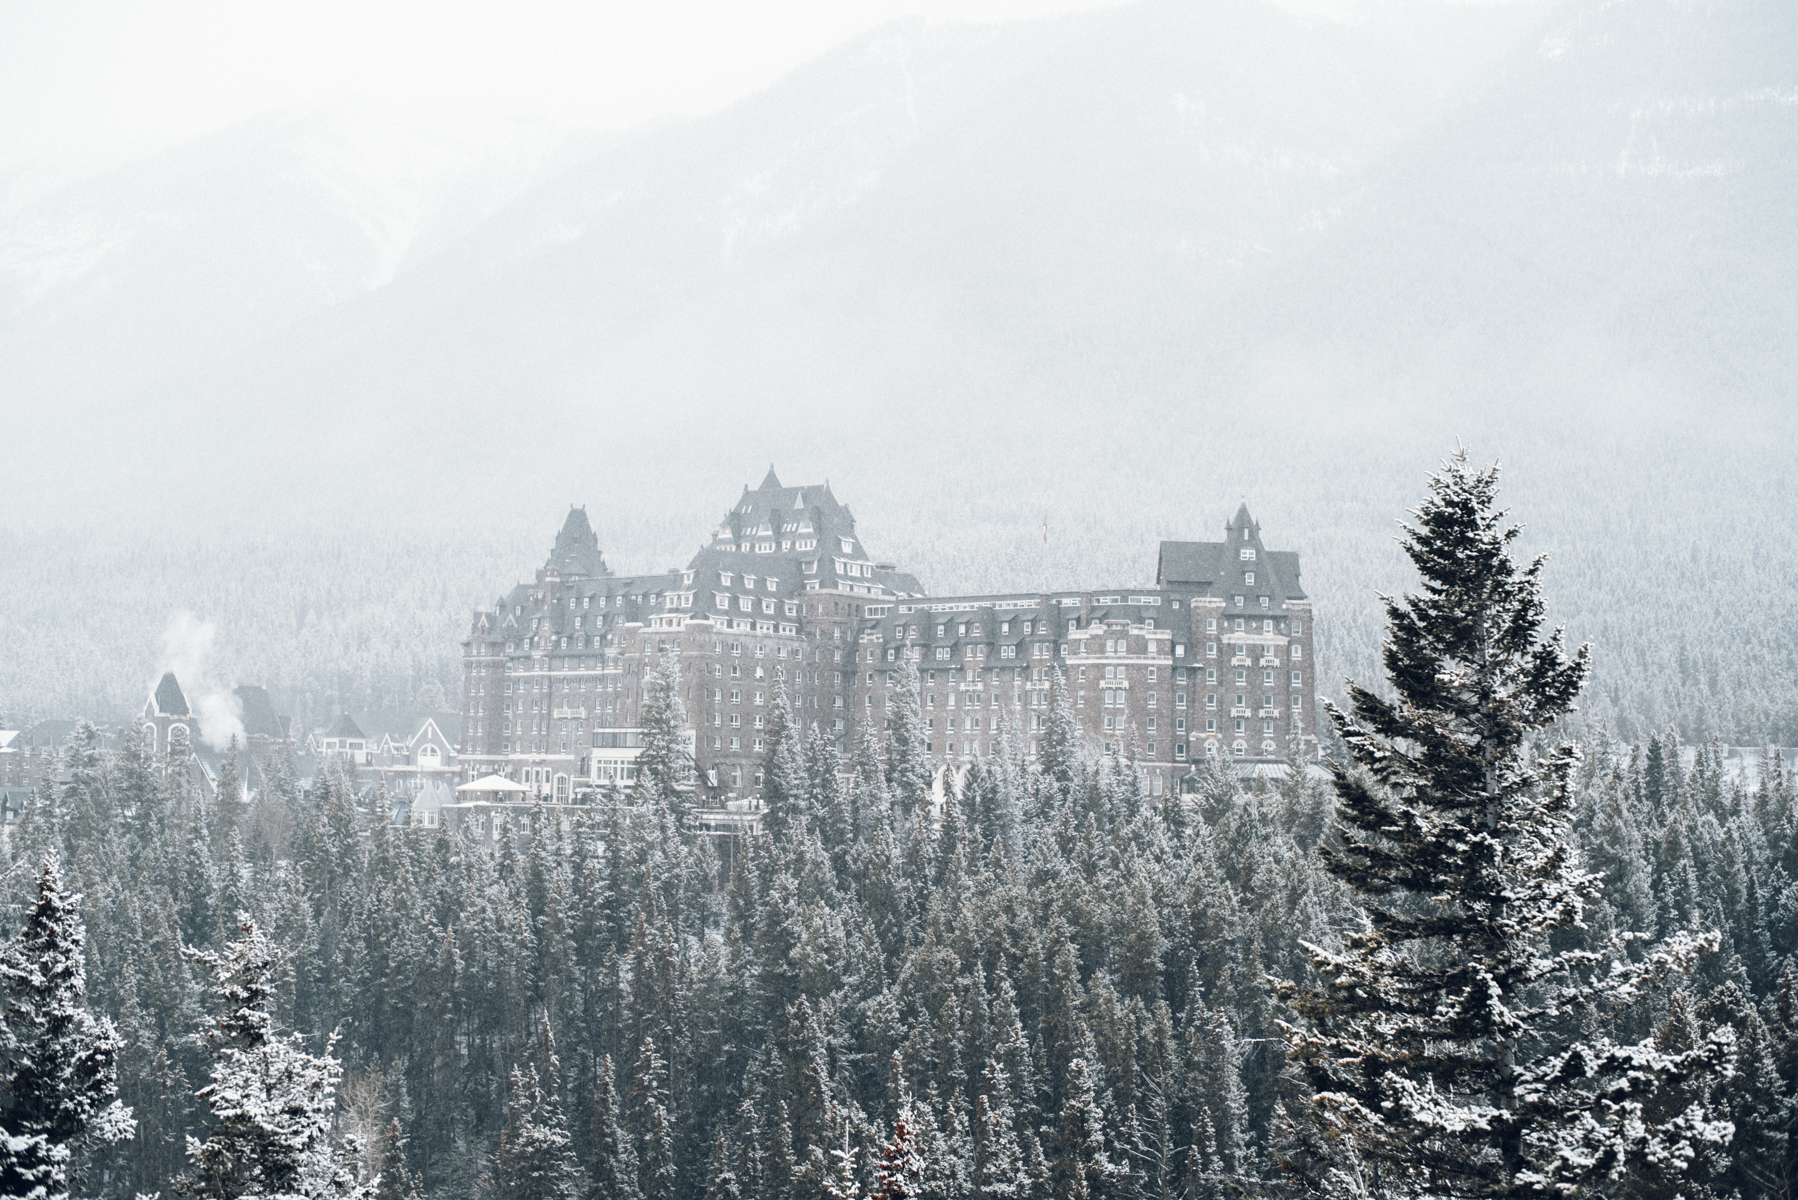 Alyssa Campanella of The A List blog experiences romance in the snow with her husband in Banff, Alberta, Canada at the Fairmont Banff Springs